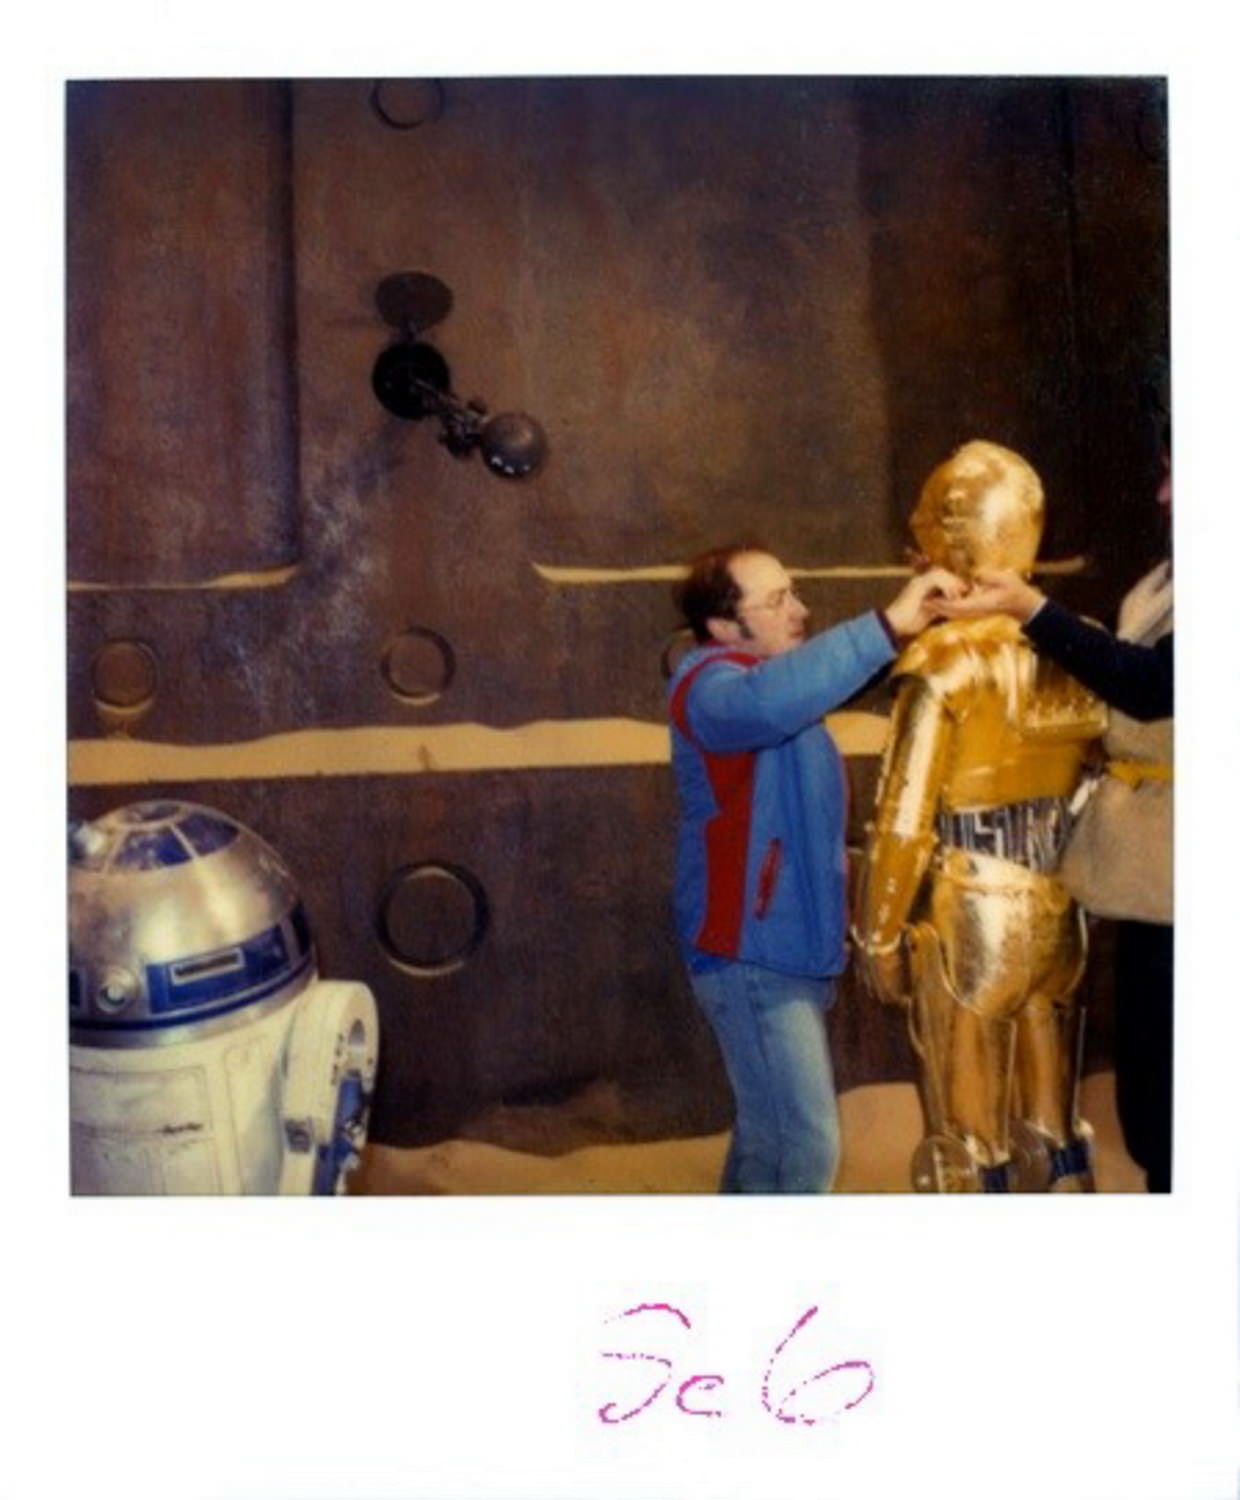 R2-D2 and C-3PO in front of Jabba's Palace.